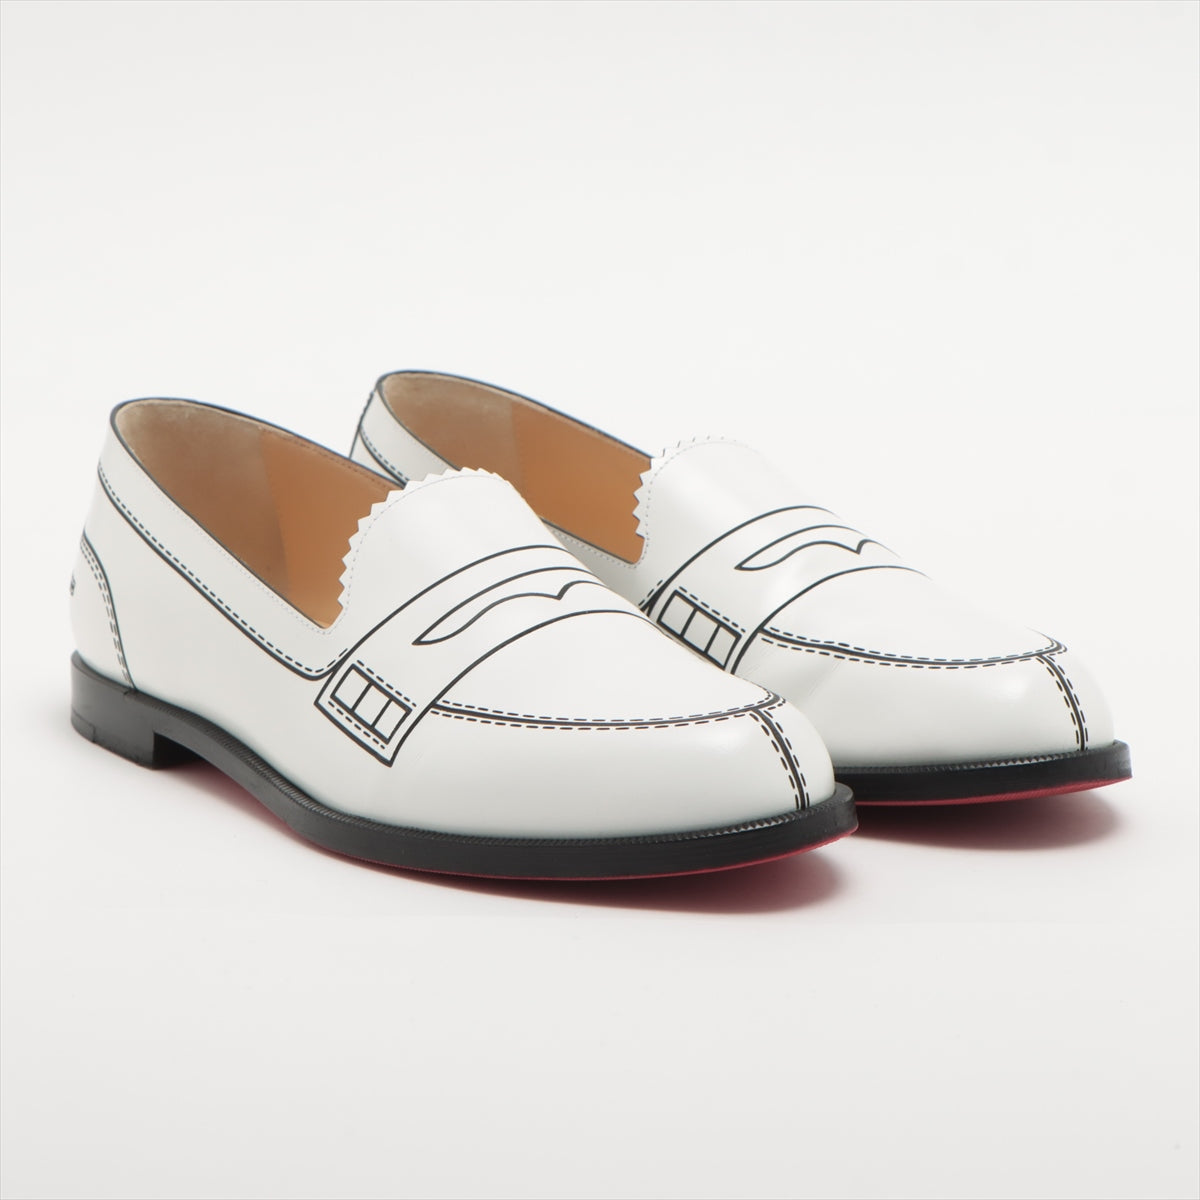 Christian Louboutin Leather Loafer 36 Ladies' Black × White MOCALAUREAT There is a box